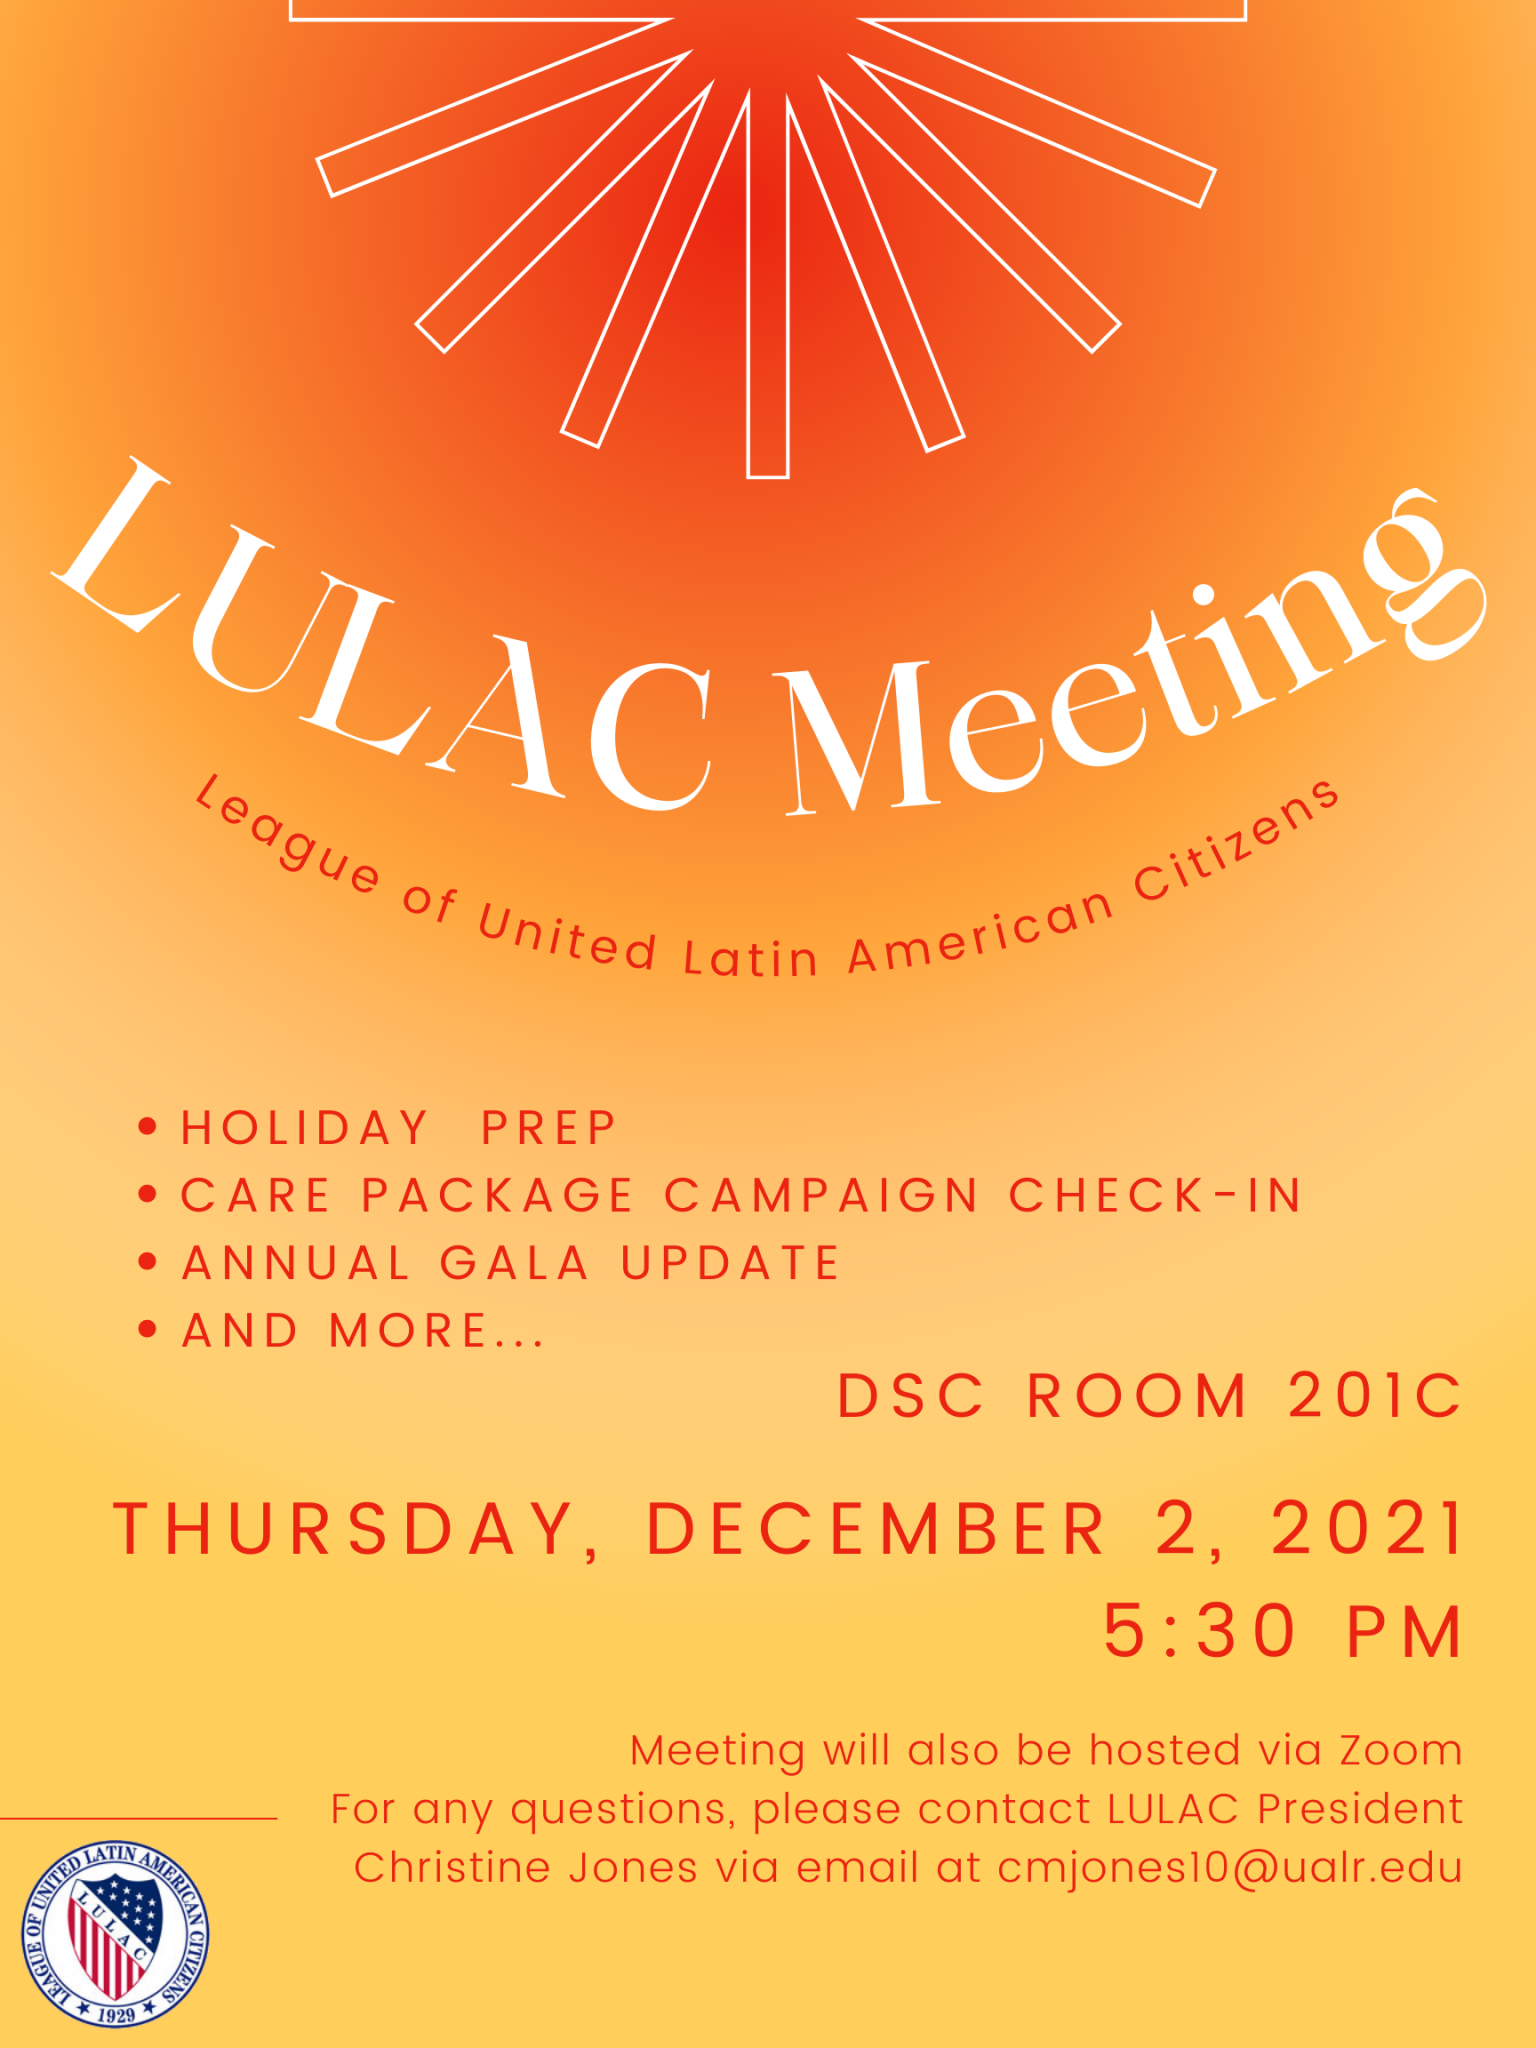 UALR League of United Latin American Citizens (LULAC) Meeting